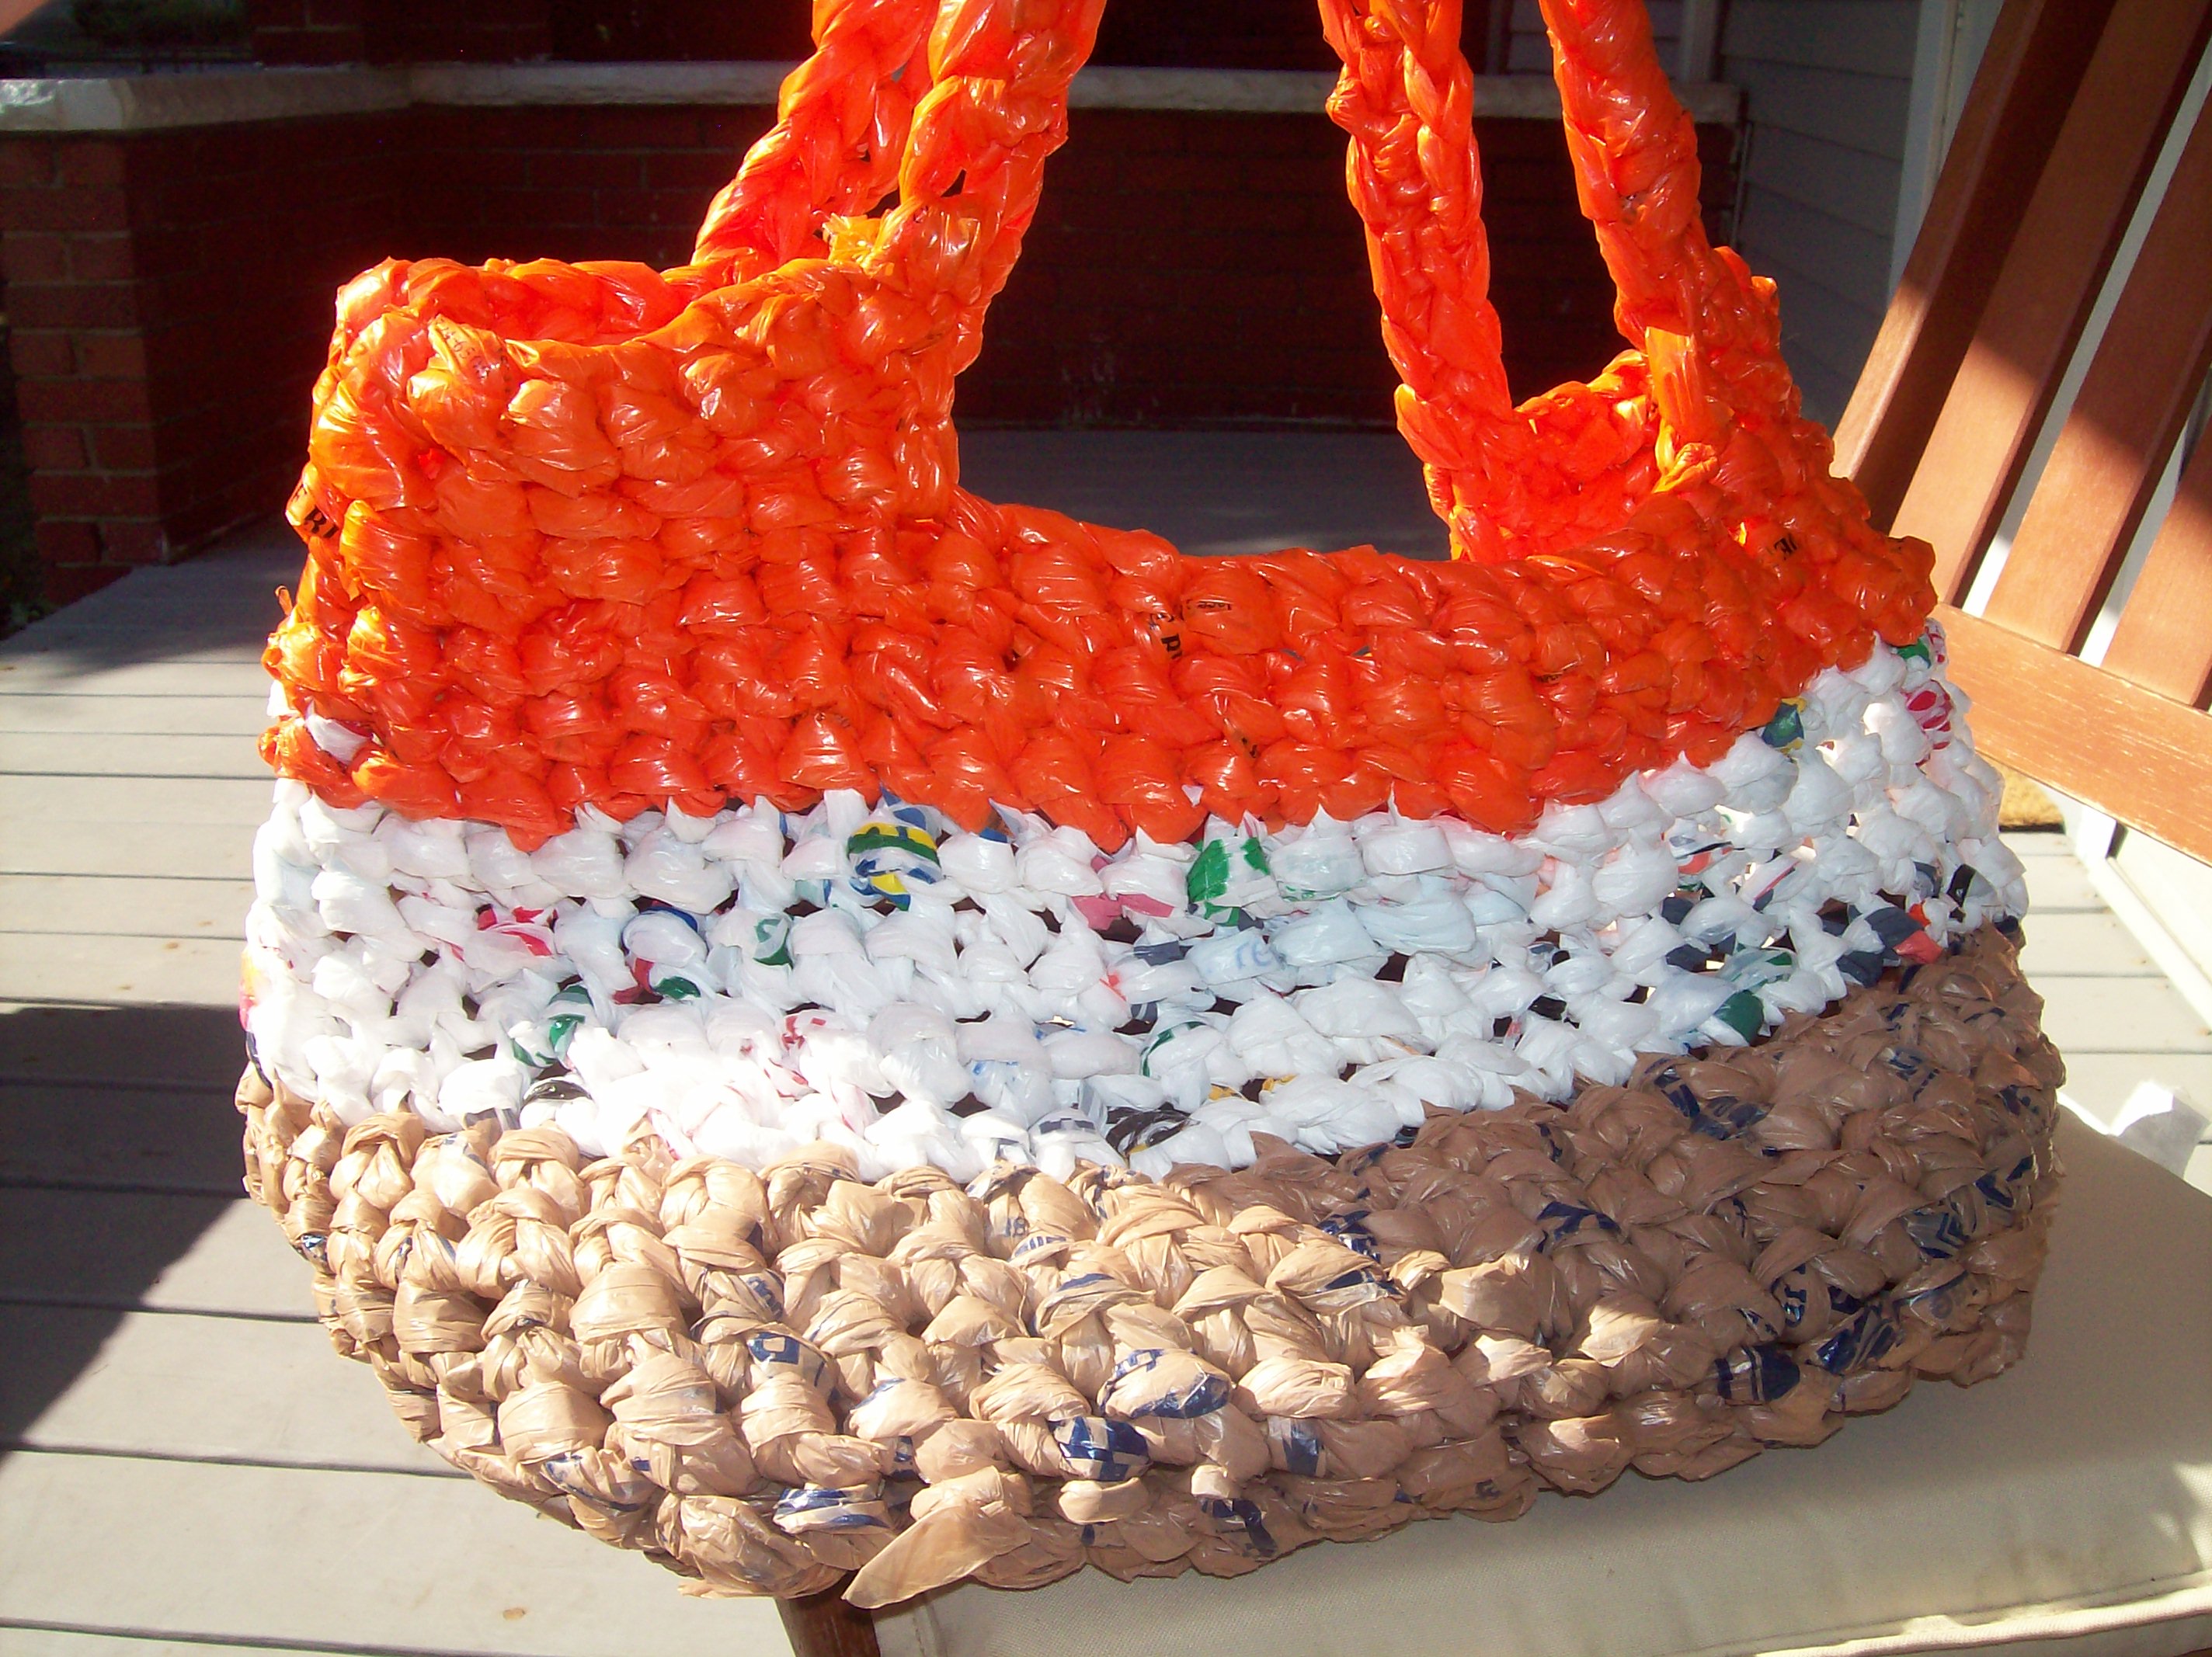 The Handbag made from Plastic Bags